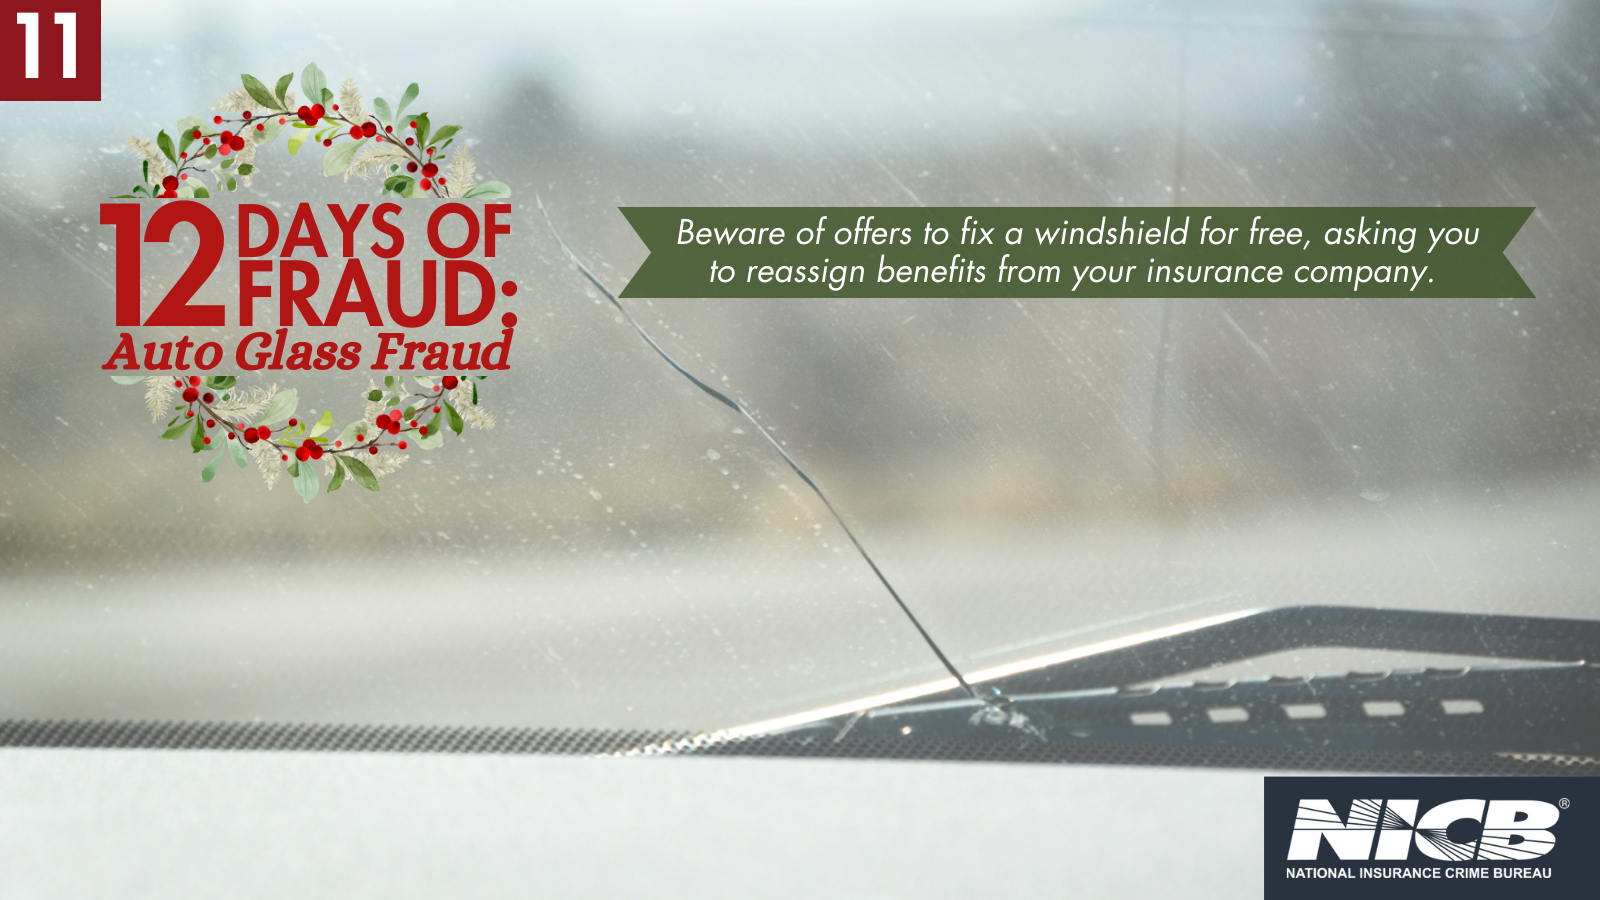 Beware of offers to fix a windshield for free, asking you to reassign benefits from your insurance company.